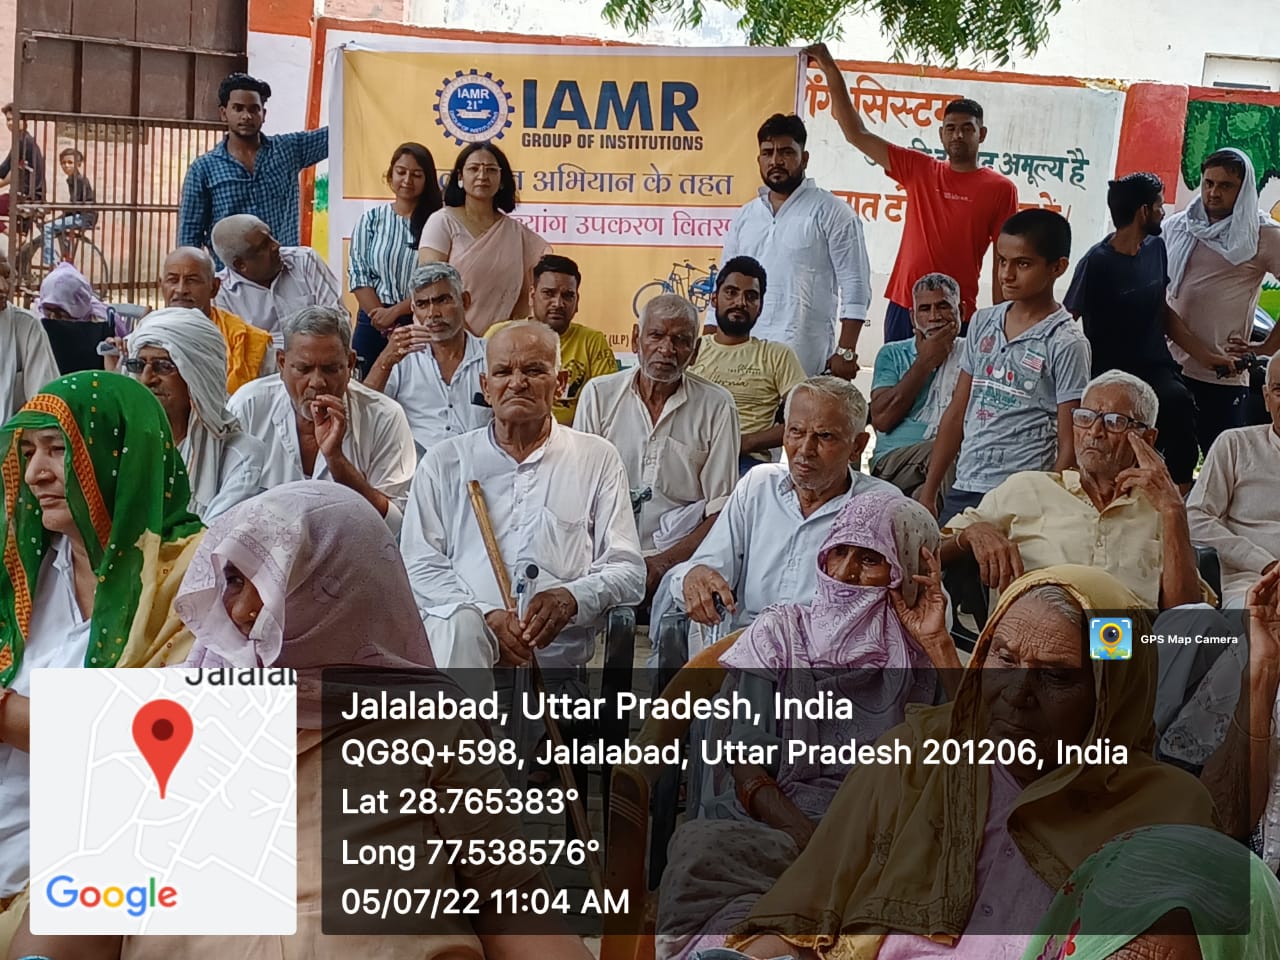 charitable event i.e. Distribution of wheelchairs, walkers, canes to the needy